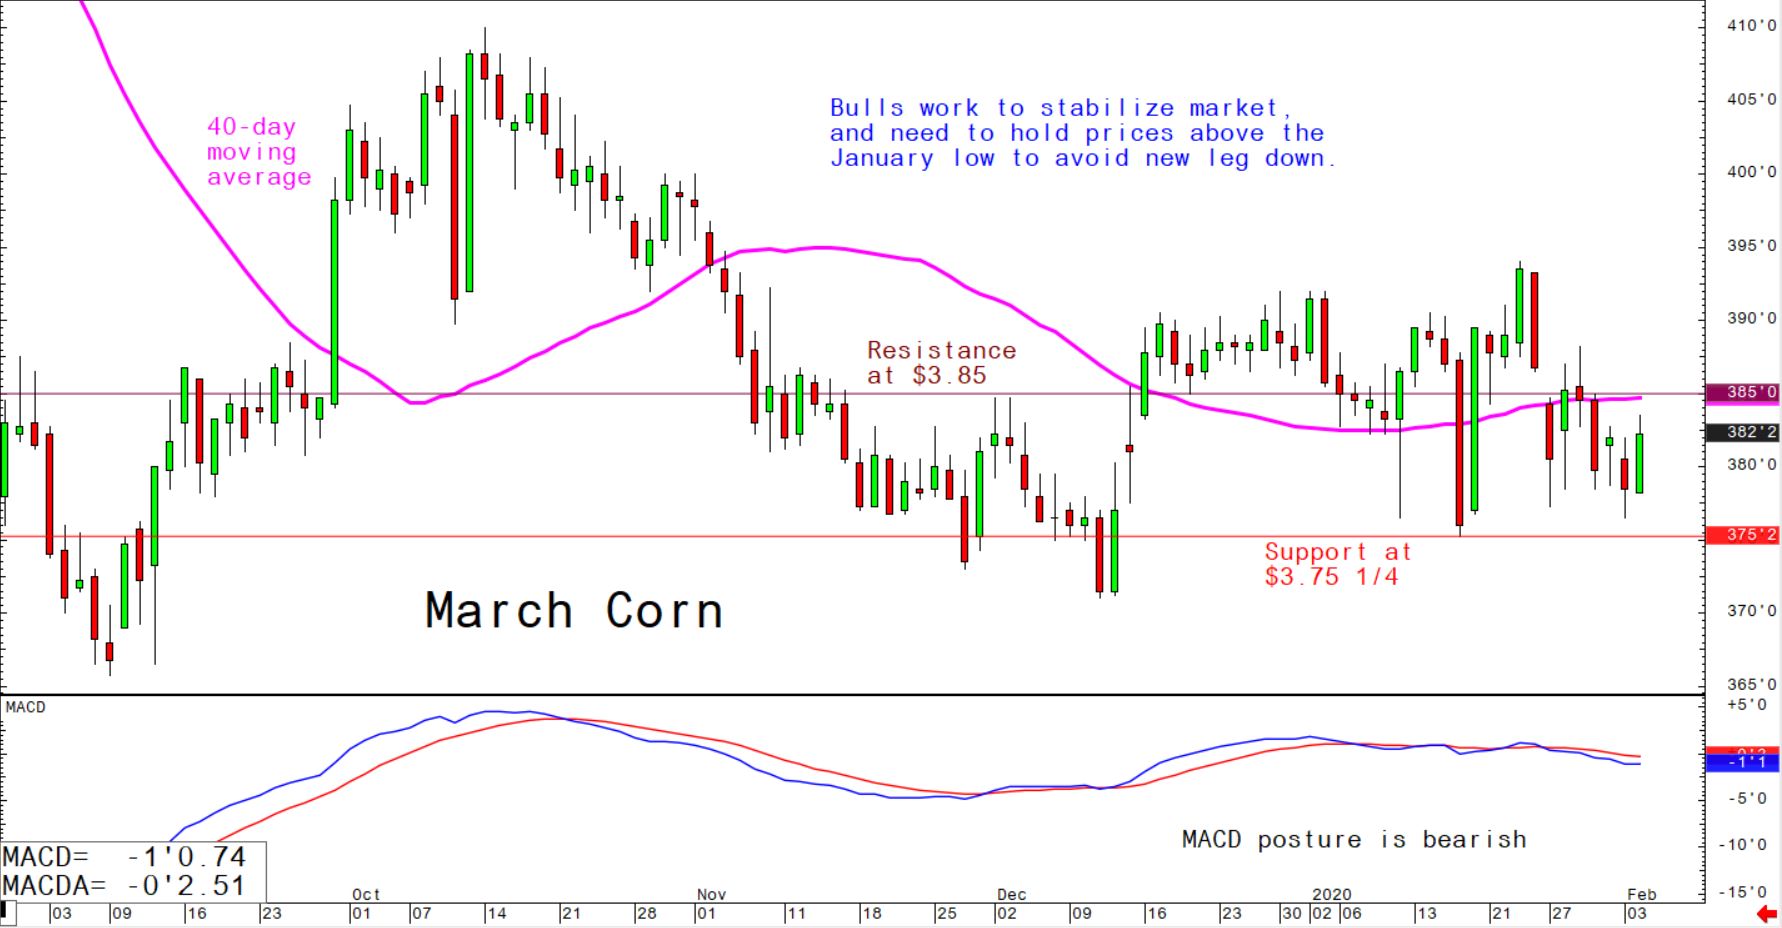 Bulls work to stabilize market and need to hold prices above the January low to avoid new leg down